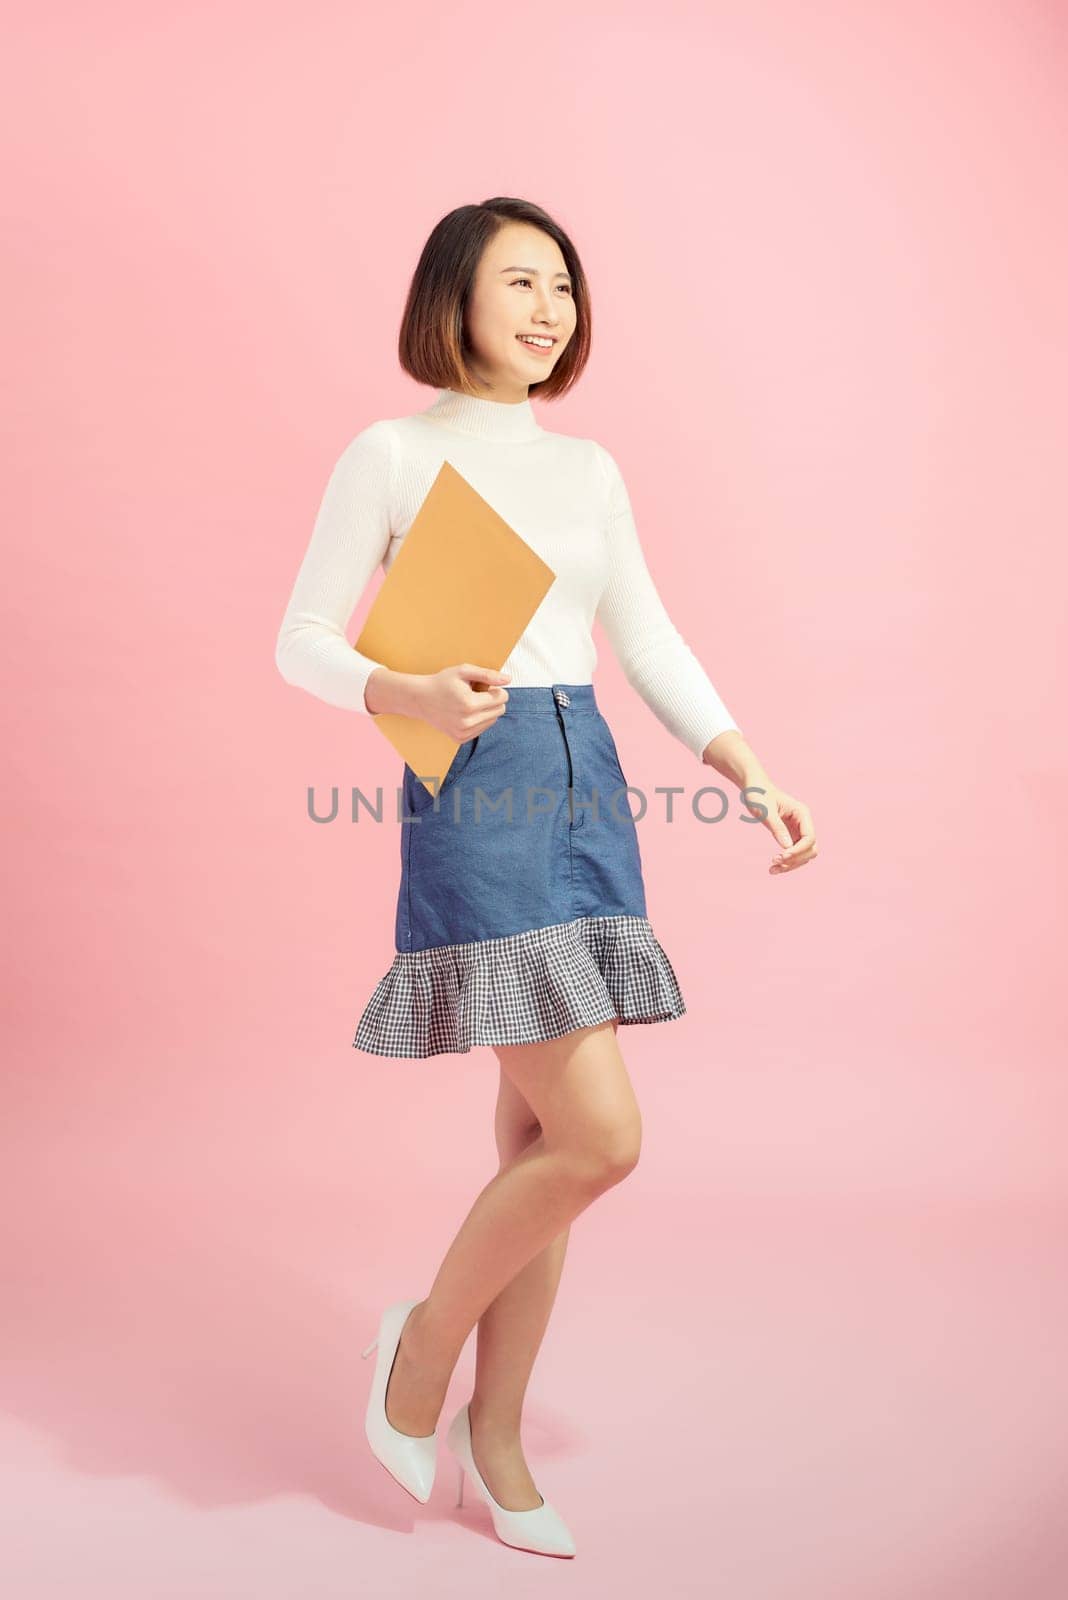 Young Asian woman holding the file standing on the white background.